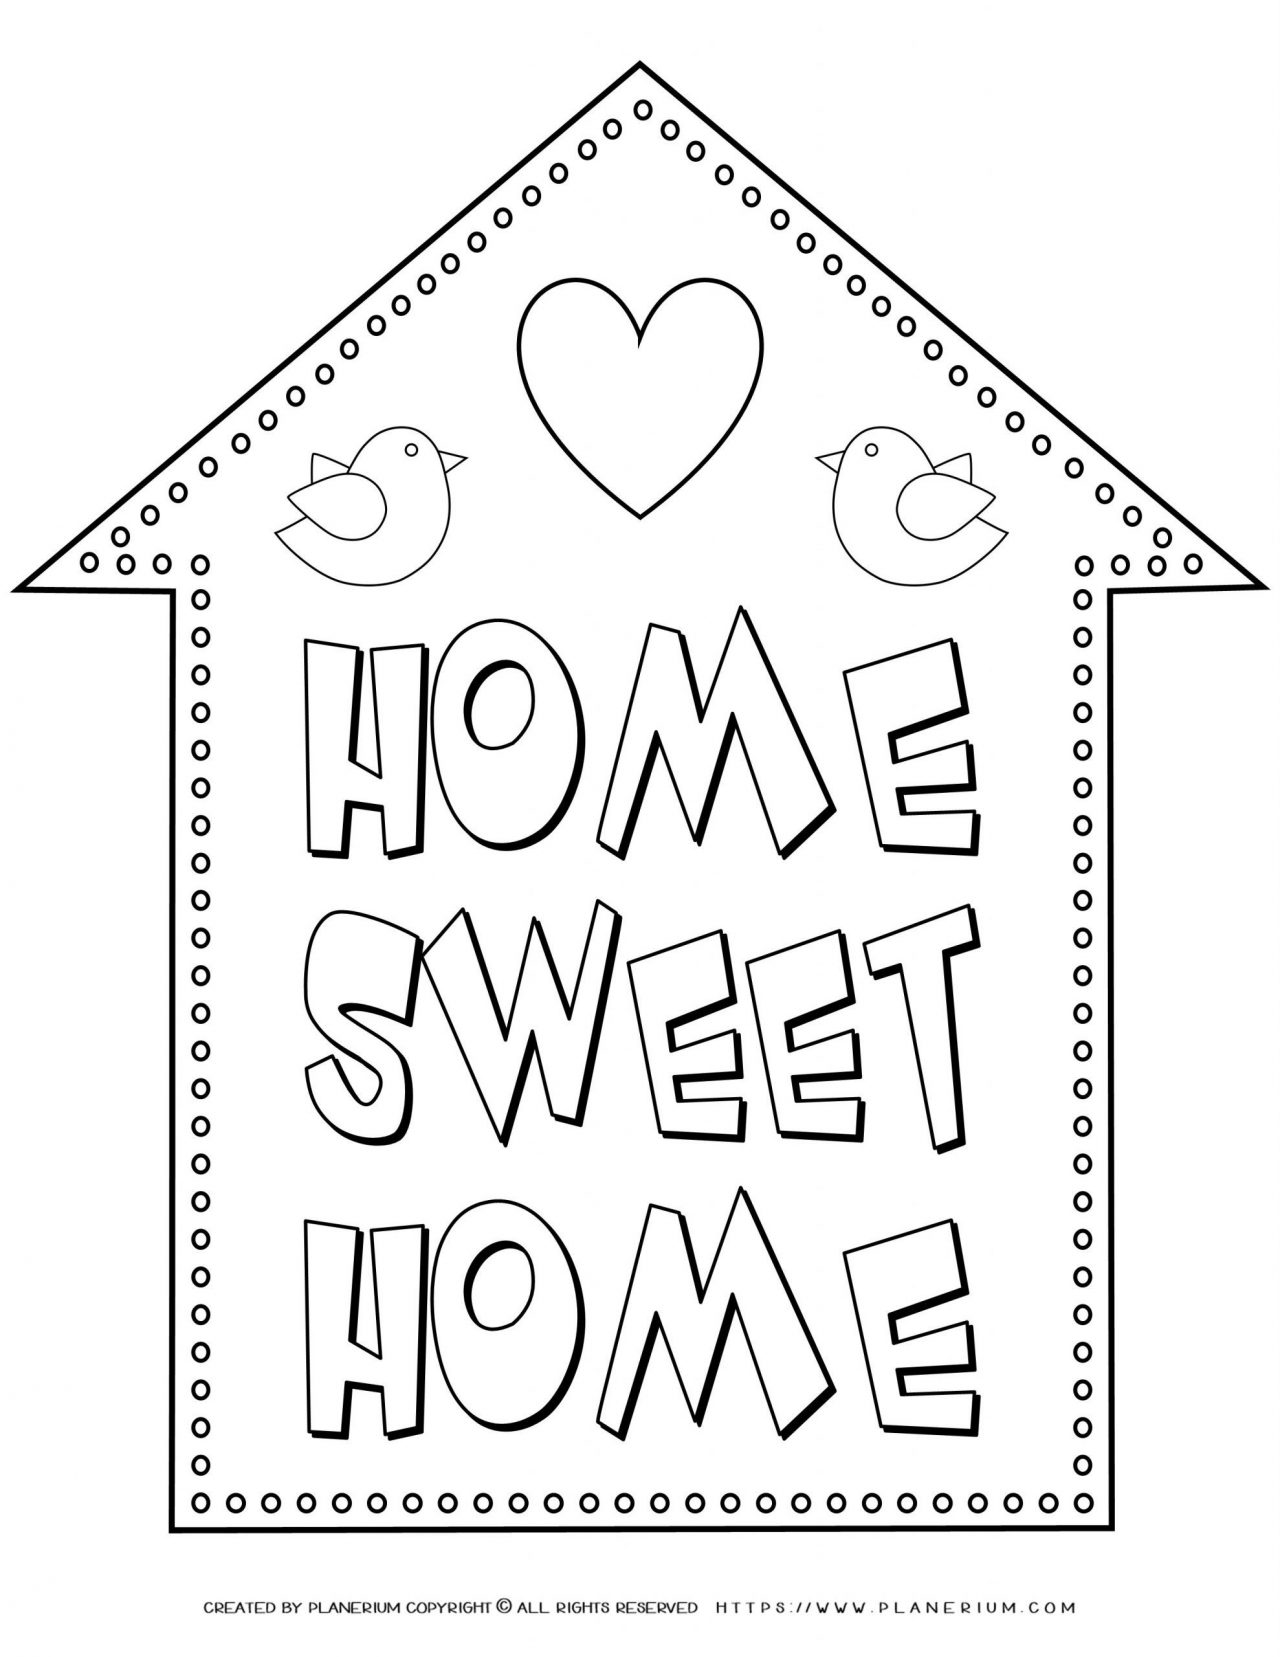 My Home - Coloring pages - Home Sweet Home | Planerium